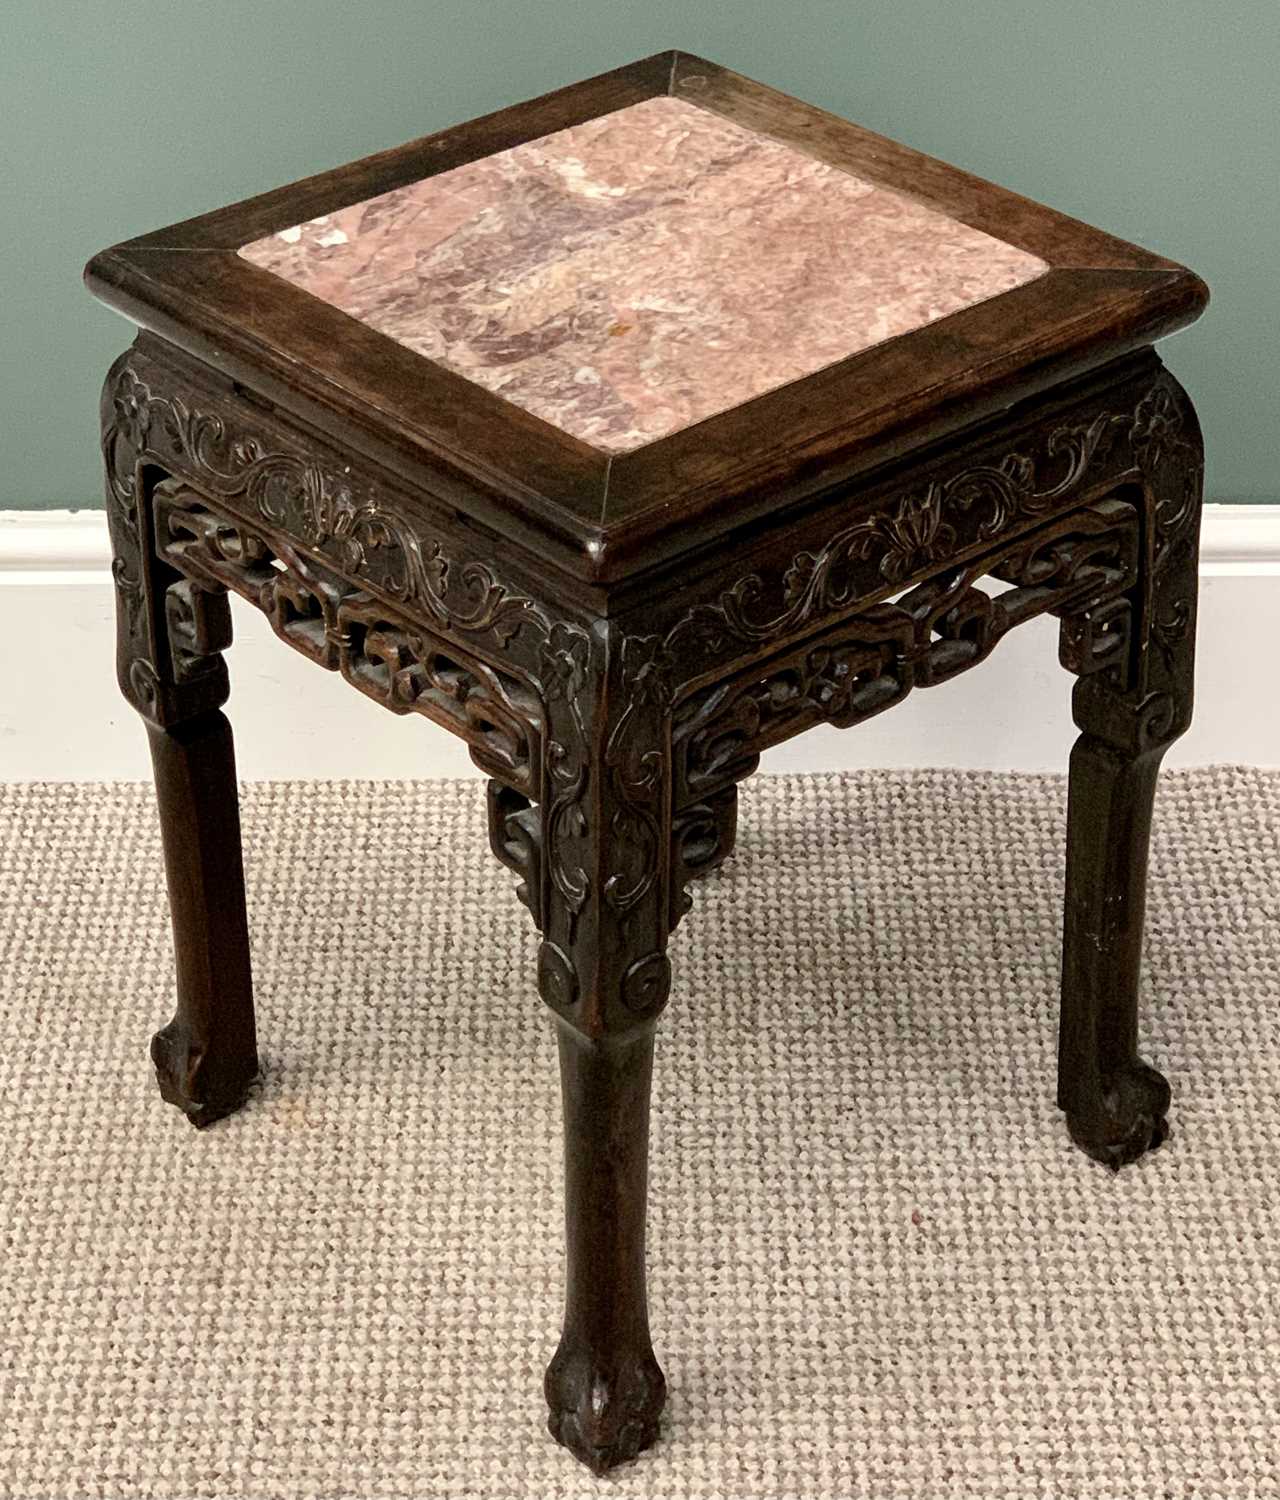 CHINESE CARVED HARDWOOD MARBLE TOPPED STAND - having fretwork lower detail, on ball and claw